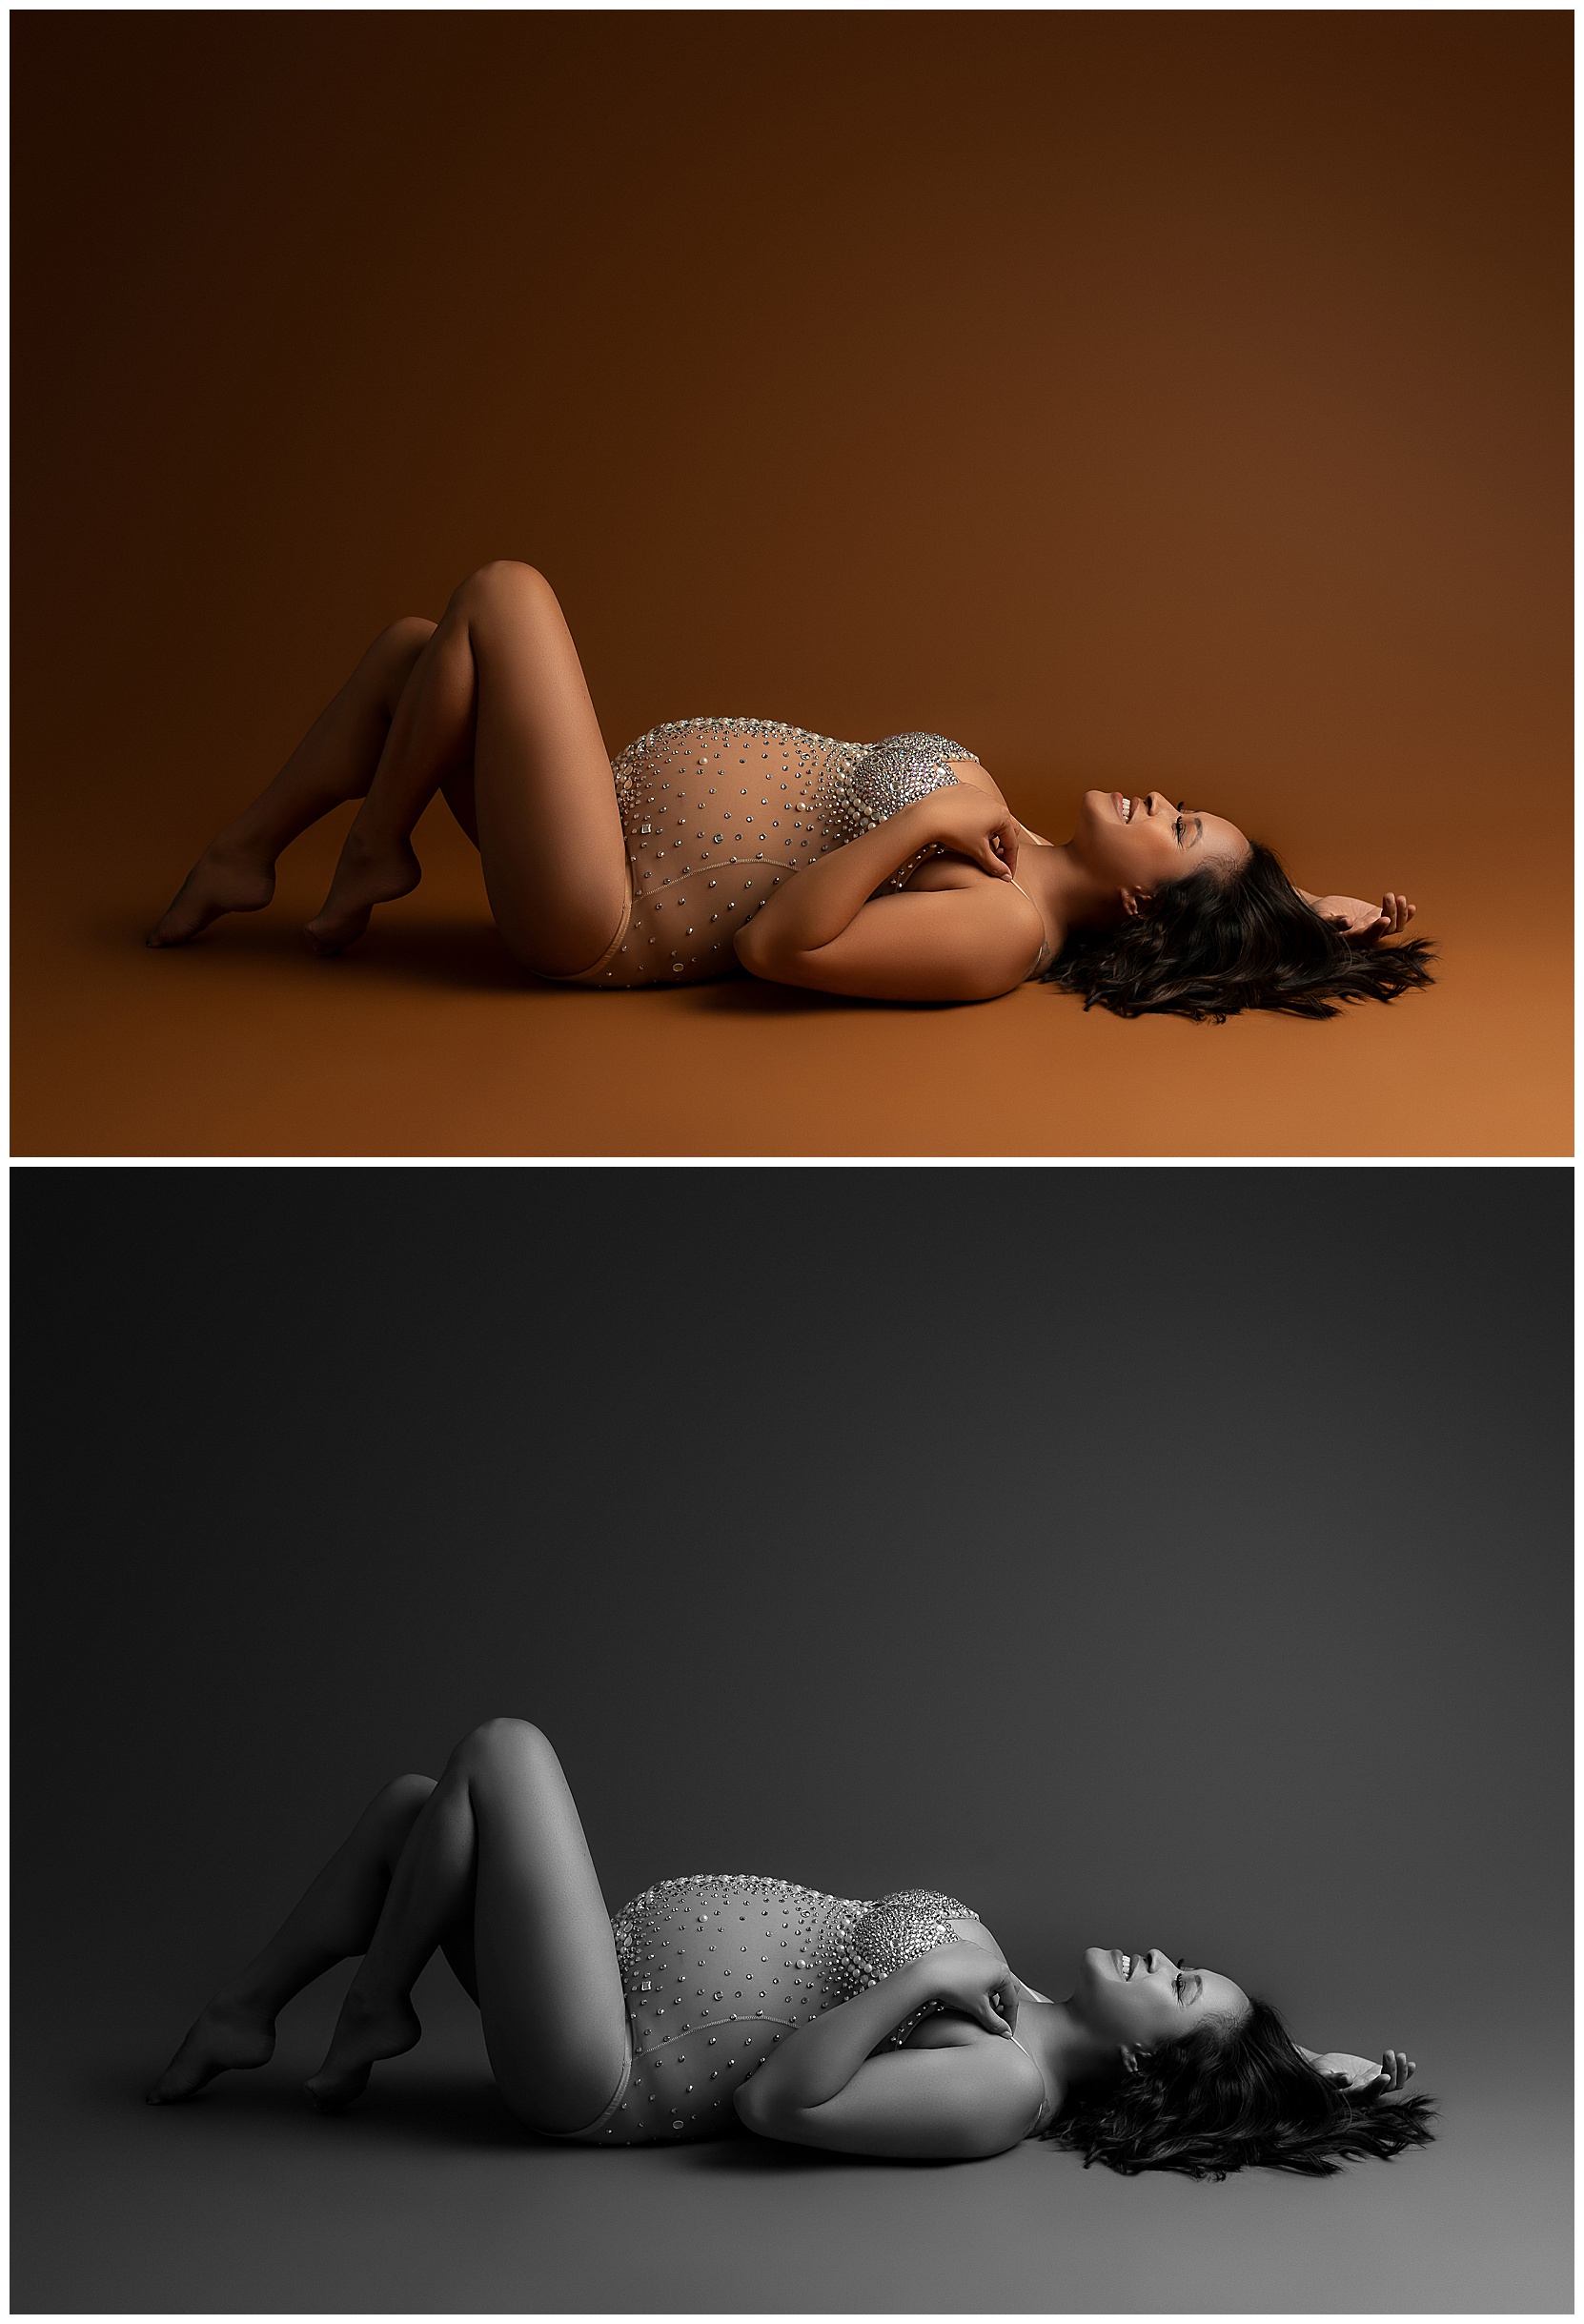 Two maternity photos, one in color and one in black and white, of a smiling pregnant woman on her back. 